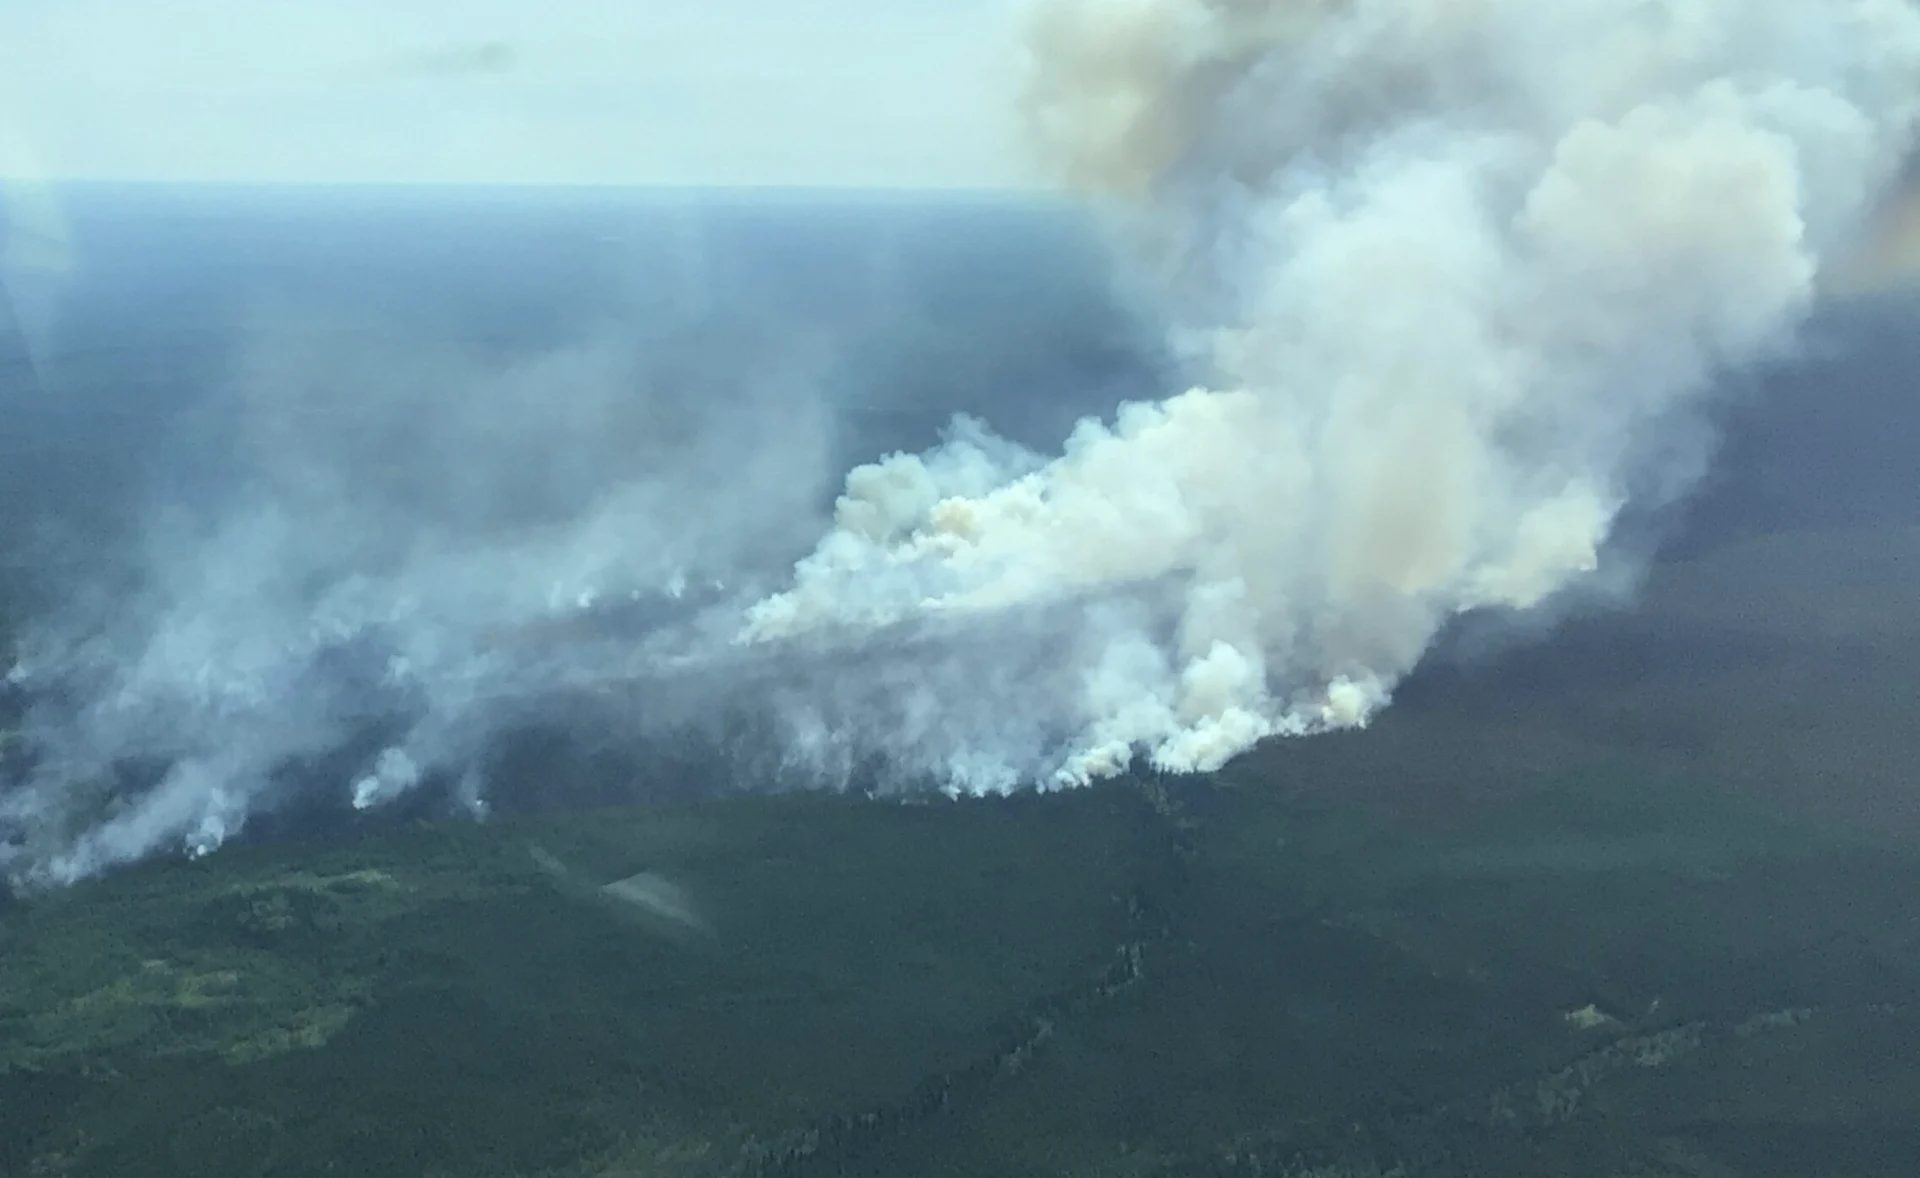 Wildfire burns out of control near Suncor's Firebag oilsands site in Alberta